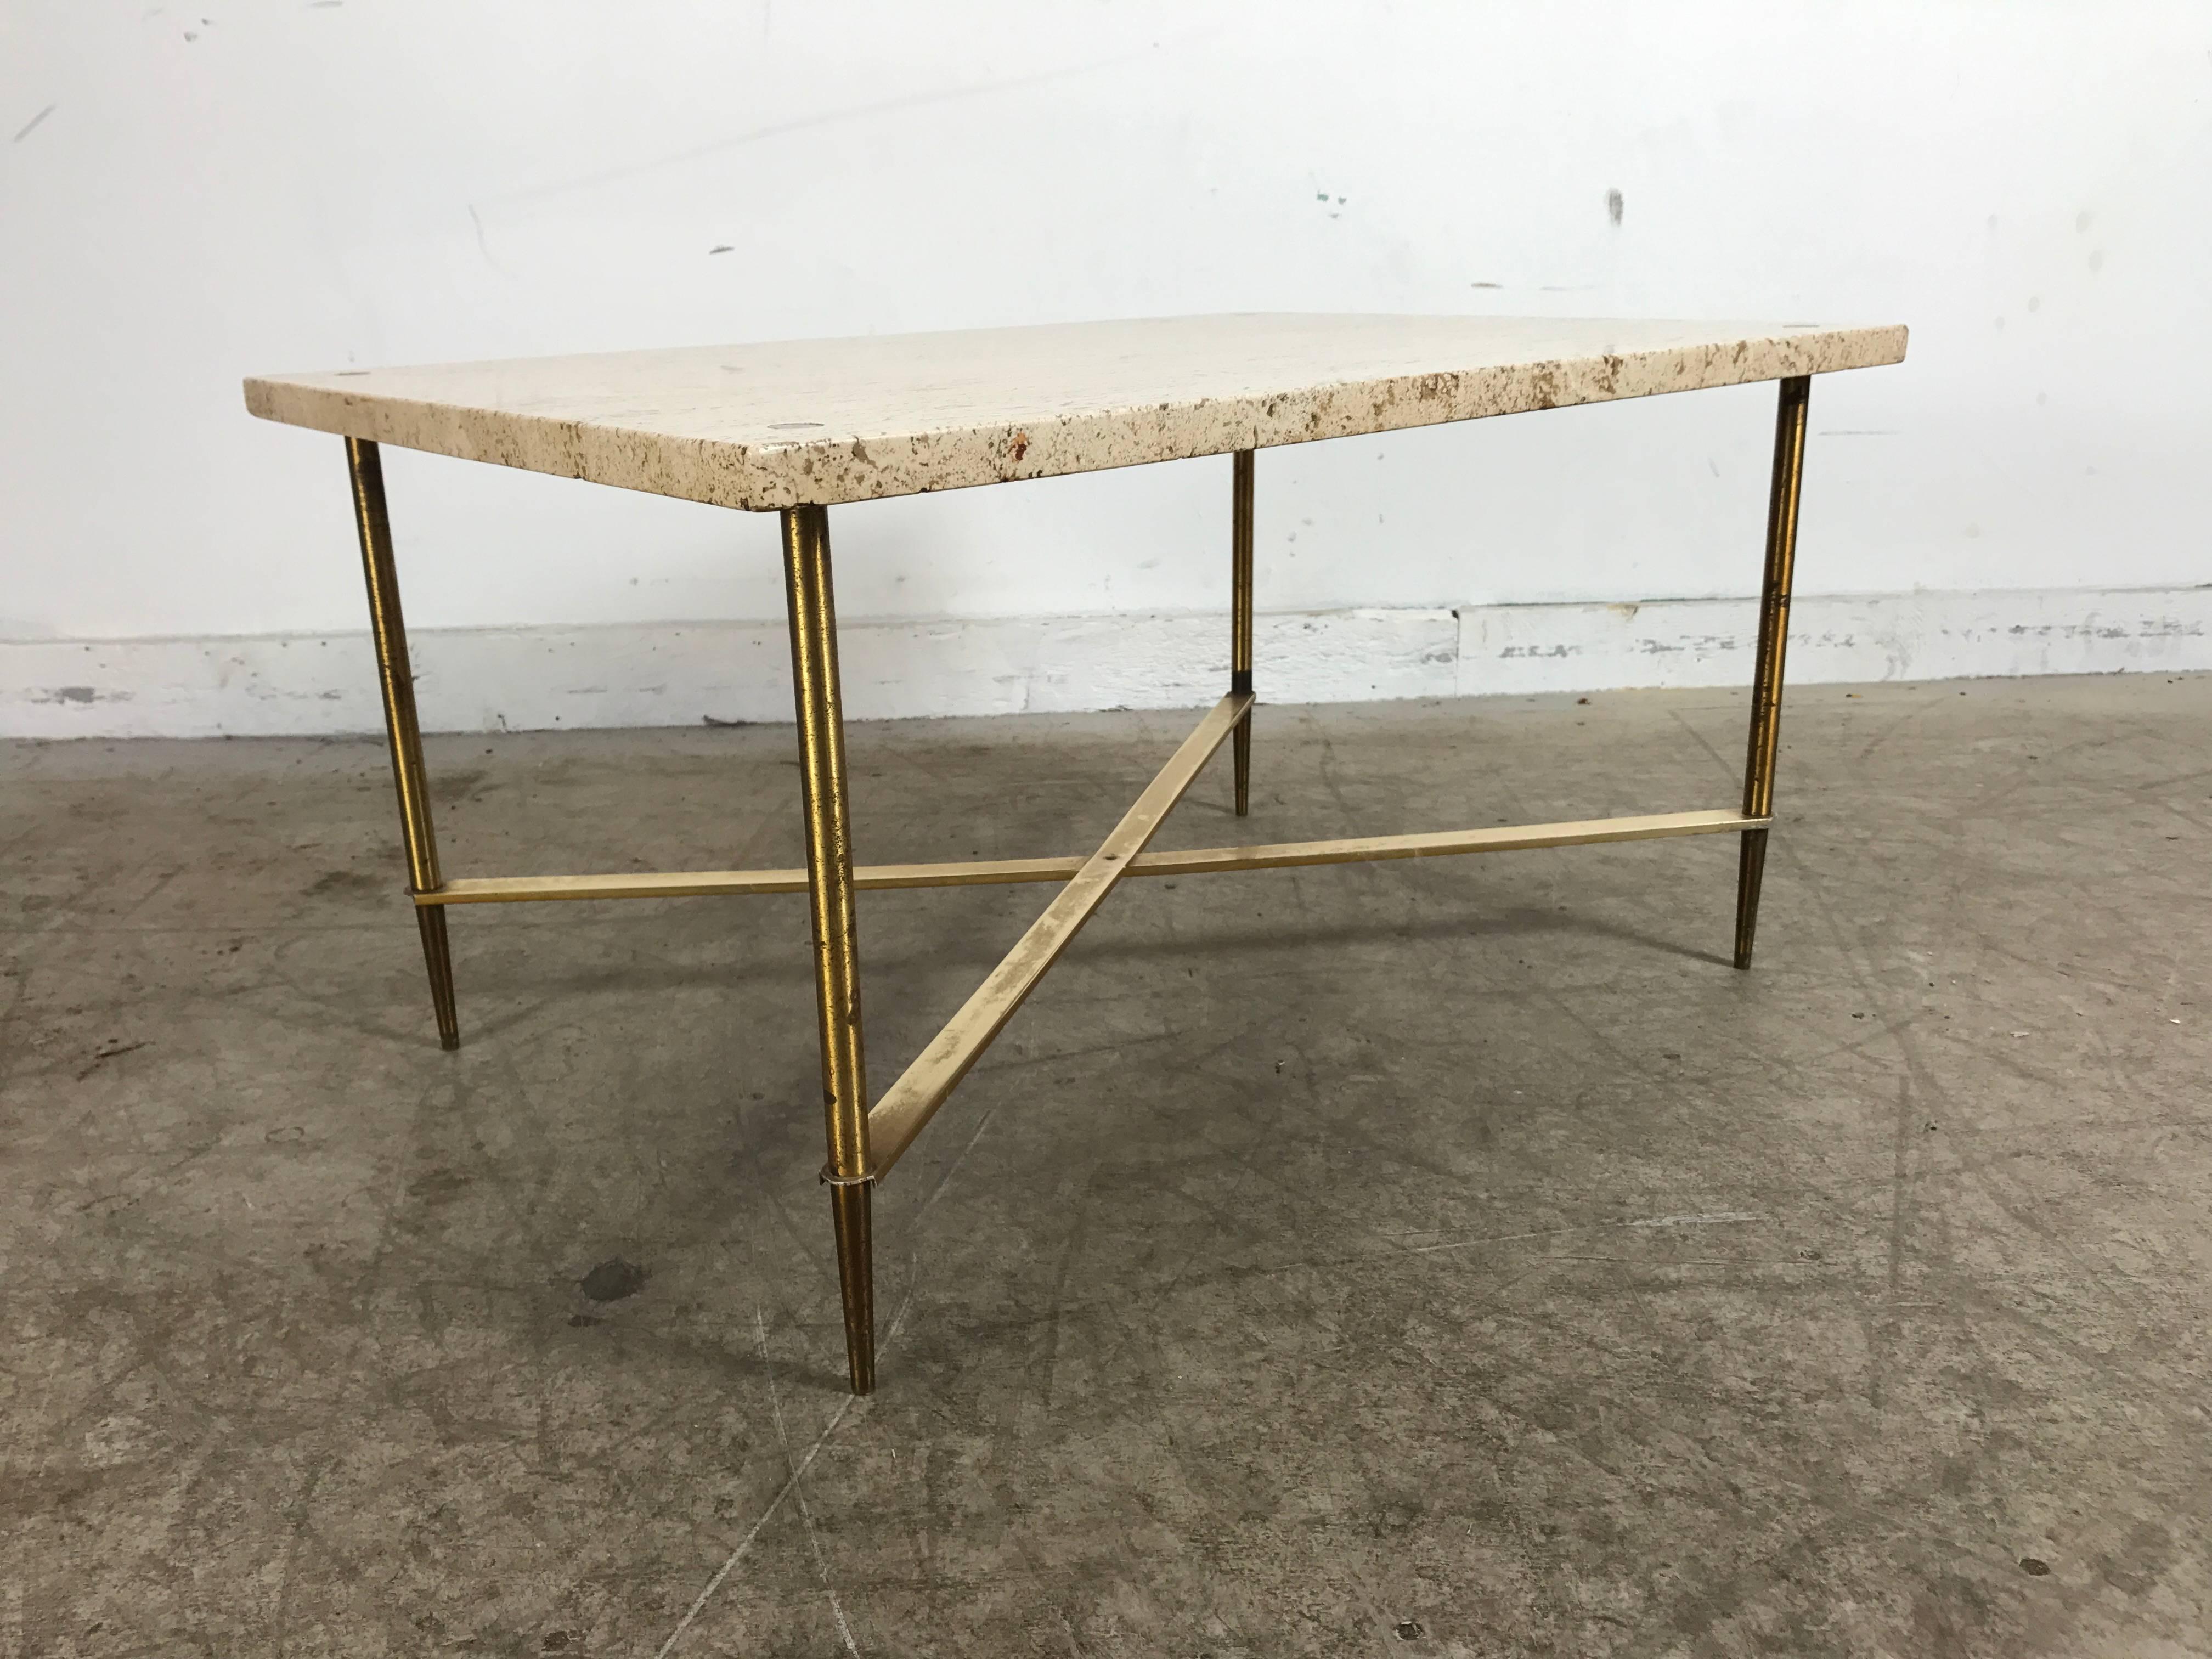 Stunning travertine and brass tables after Gio Ponti made in Italy, classic modernist regency design, solid brass legs and X stretchers, legs dowel thru top. Versatile height and design that allows tables to be used as coffee / cocktail, ends or